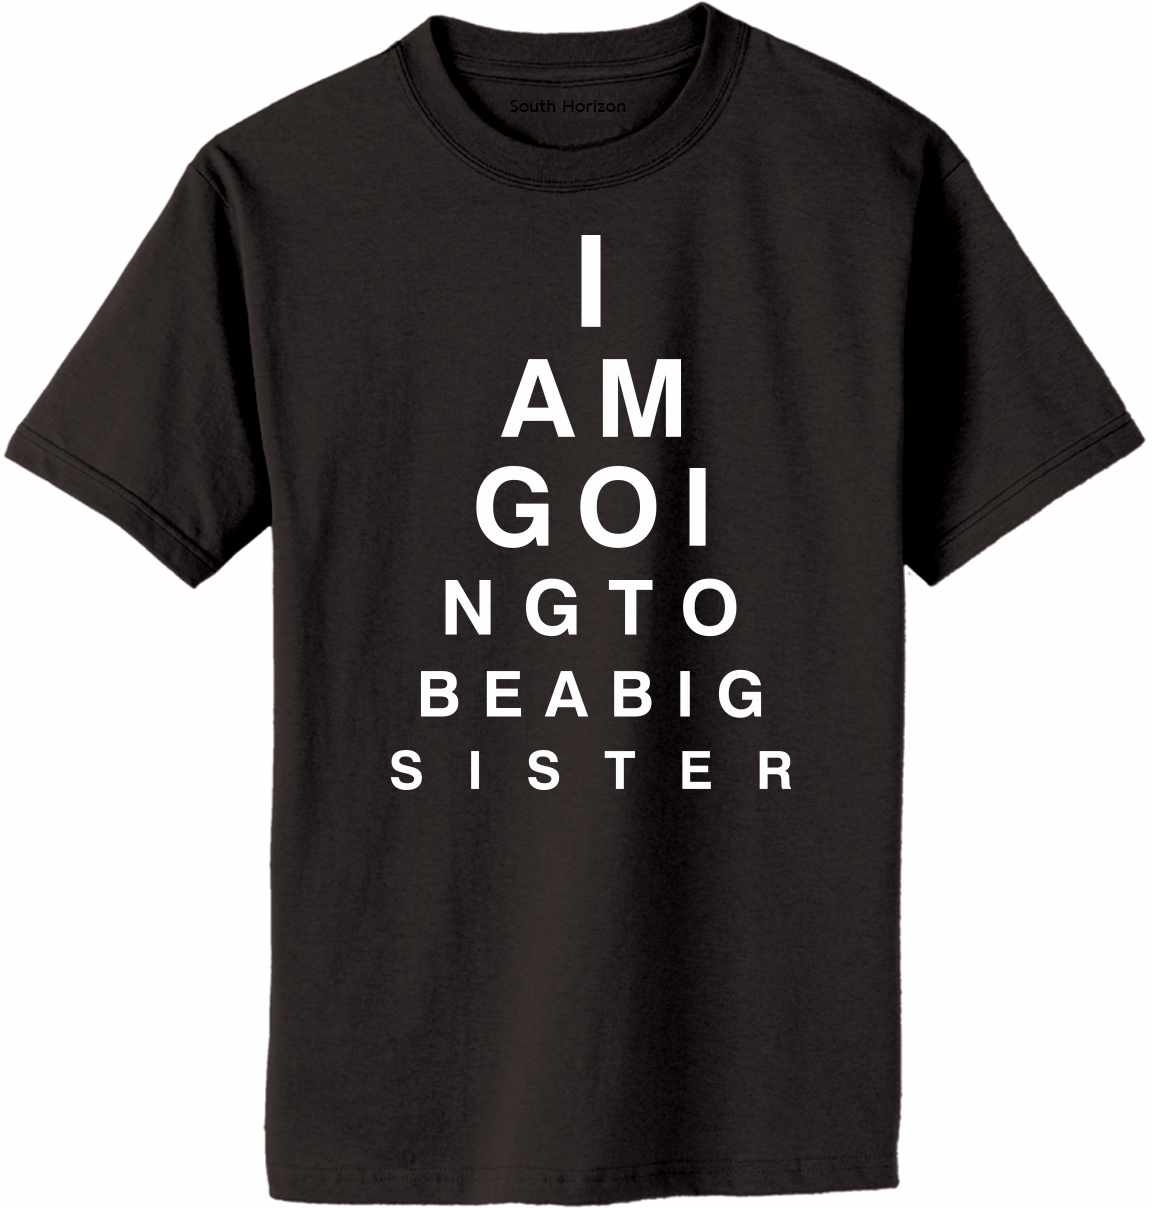 I AM GOING TO BE BIG SISTER EYE CHART Adult T-Shirt (#1099-1)